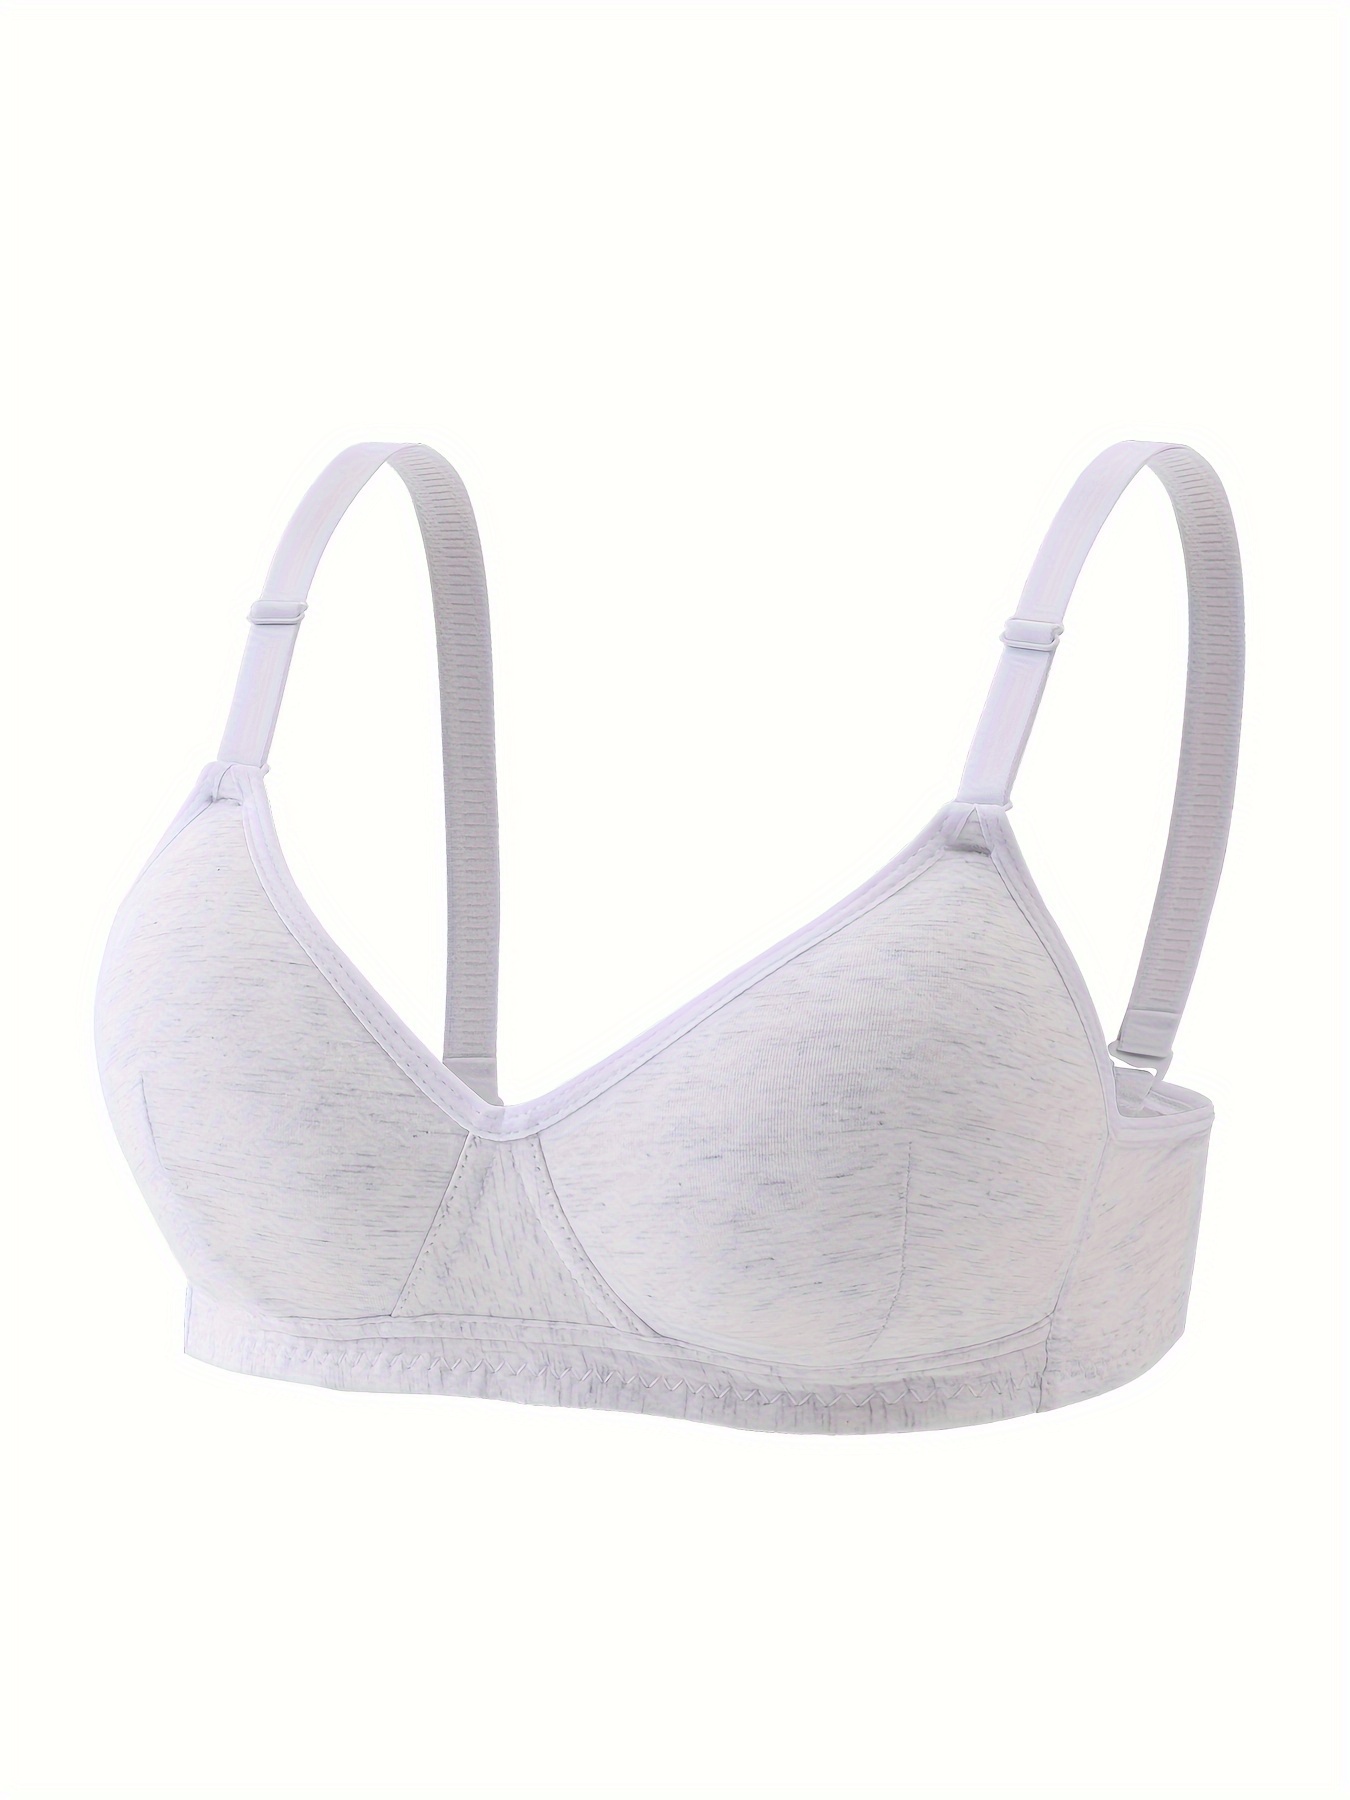 GIRLS TEEN BRA Lace Trim 100% Cotton White Size 32A No Wire Brand NEW with  Tags' £8.99 - PicClick UK